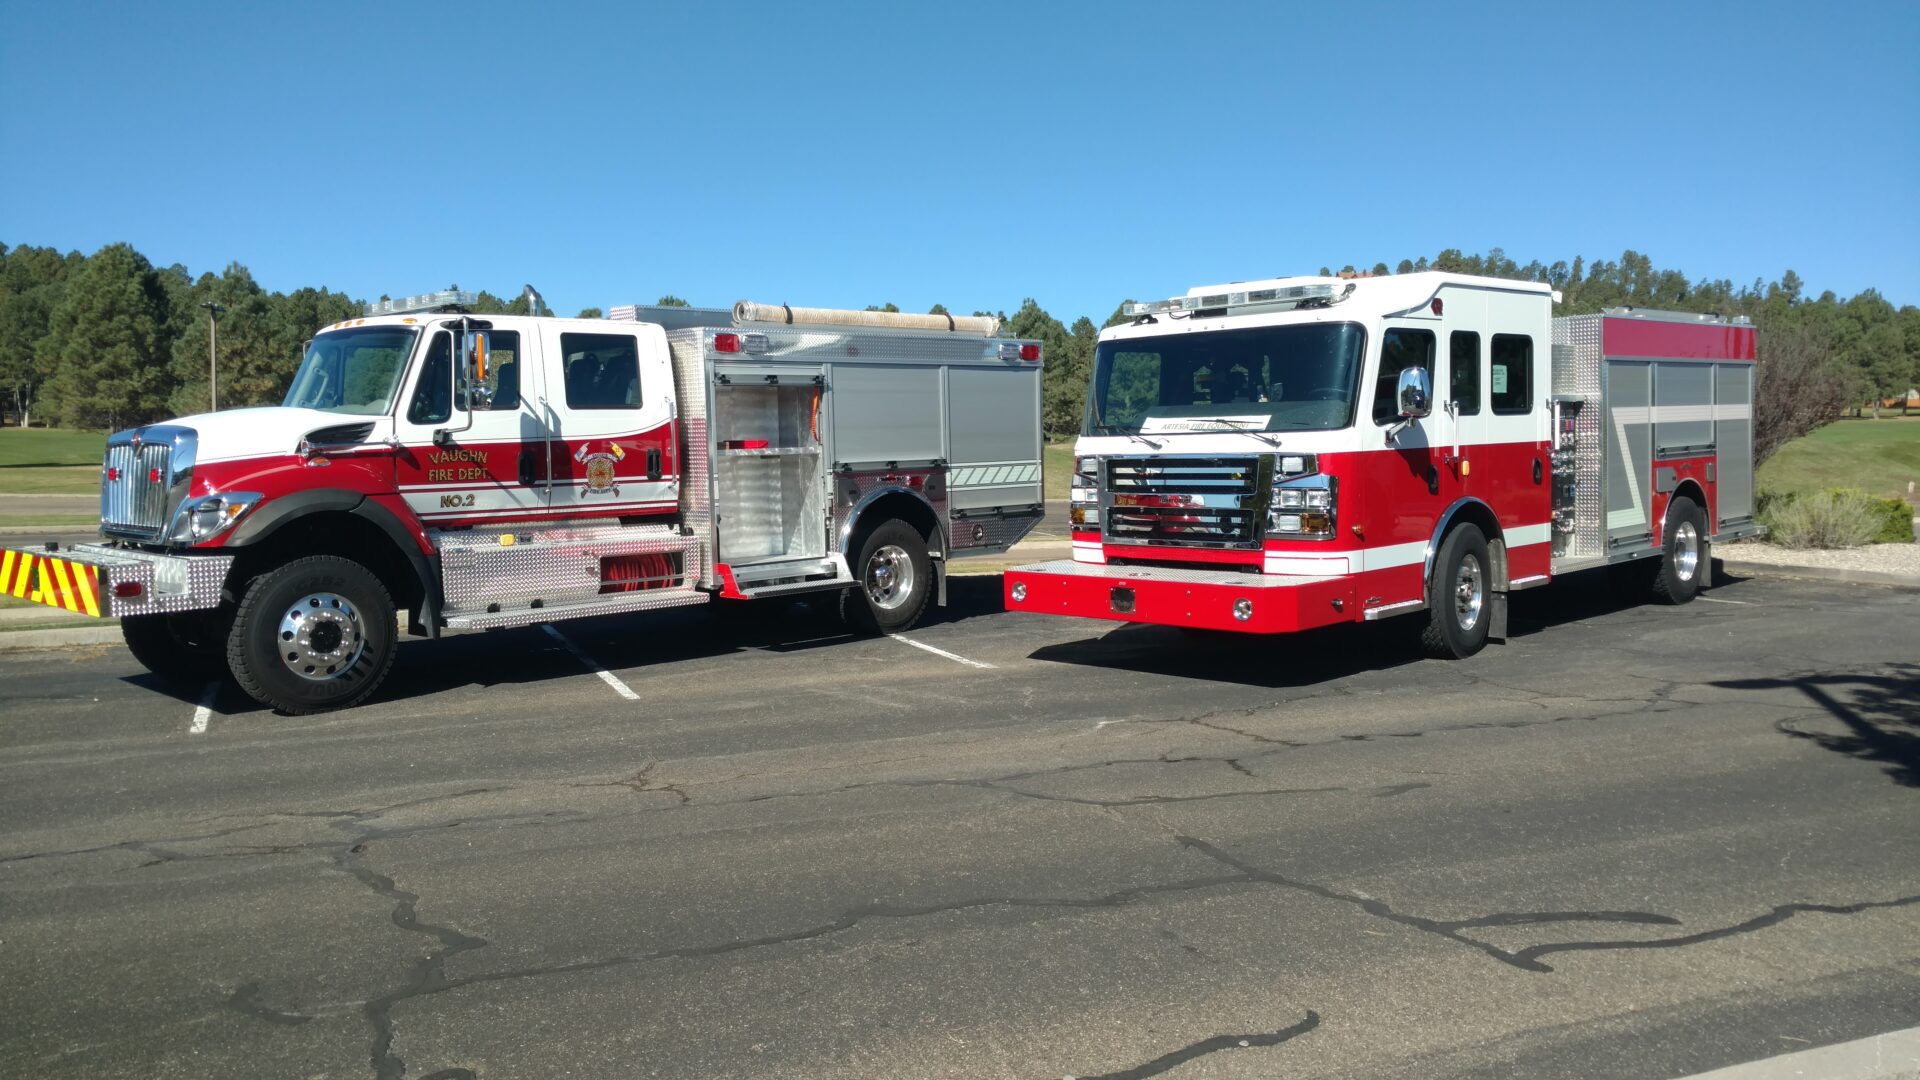 Two Fire Trucks in White and Red Color Body